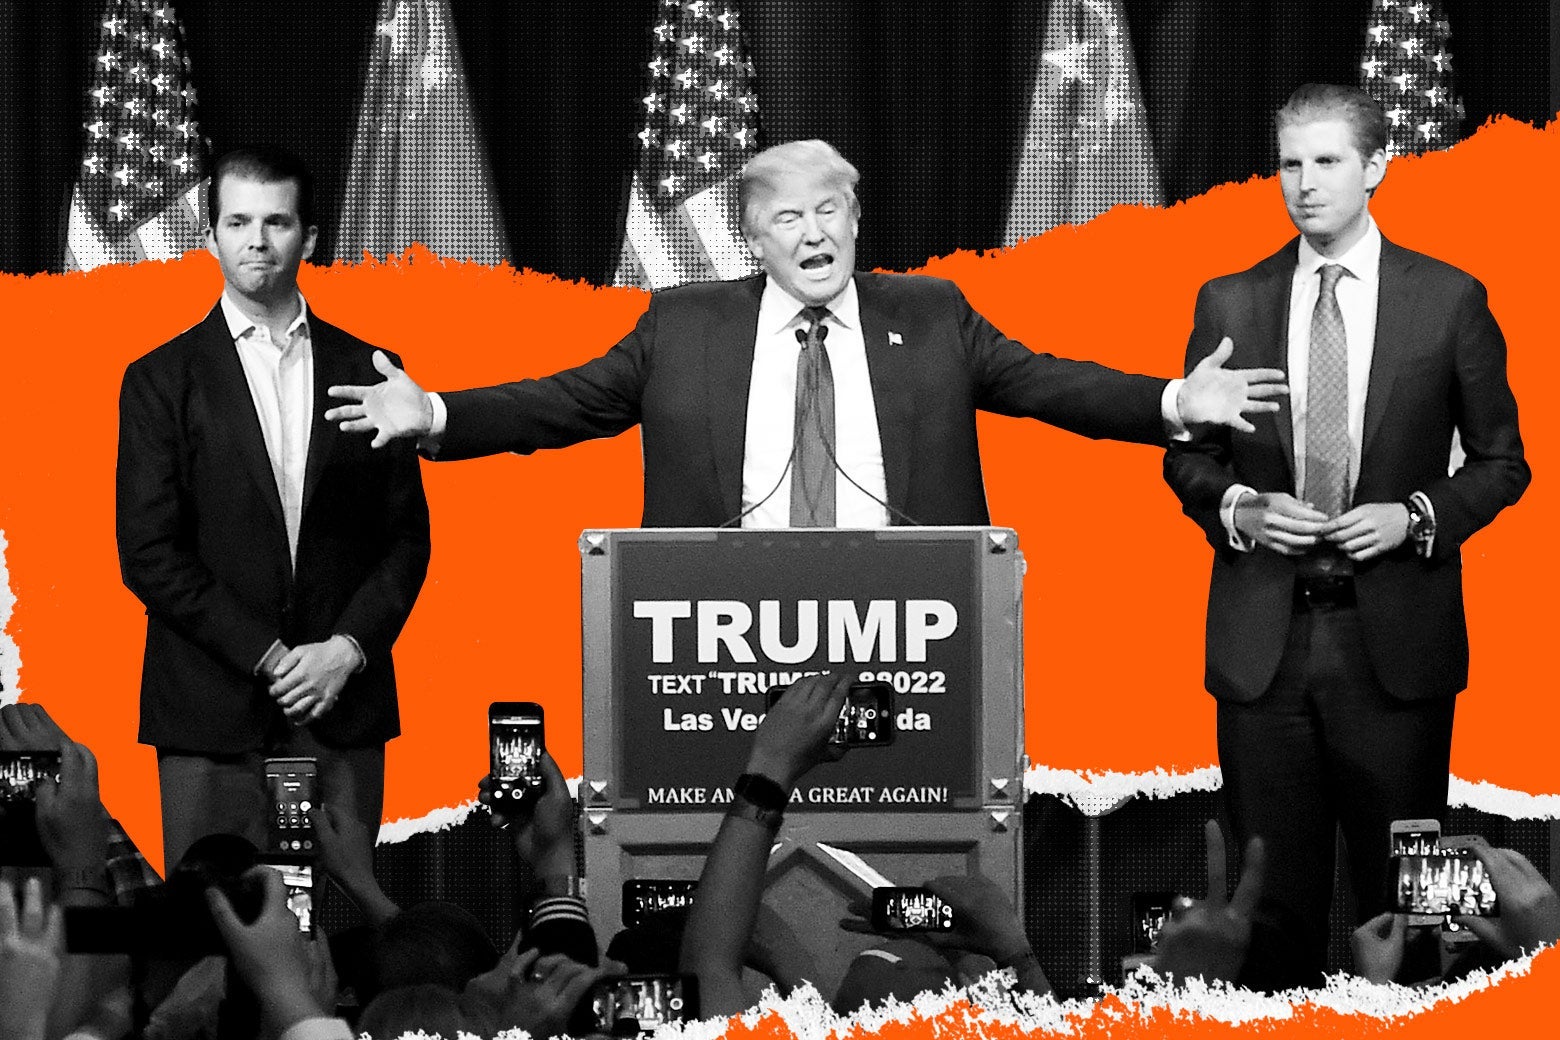 Donald Trump spreads his arms wide behind a podium that says TRUMP. His sons Donald Trump Jr. and Eric Trump stand beside him.